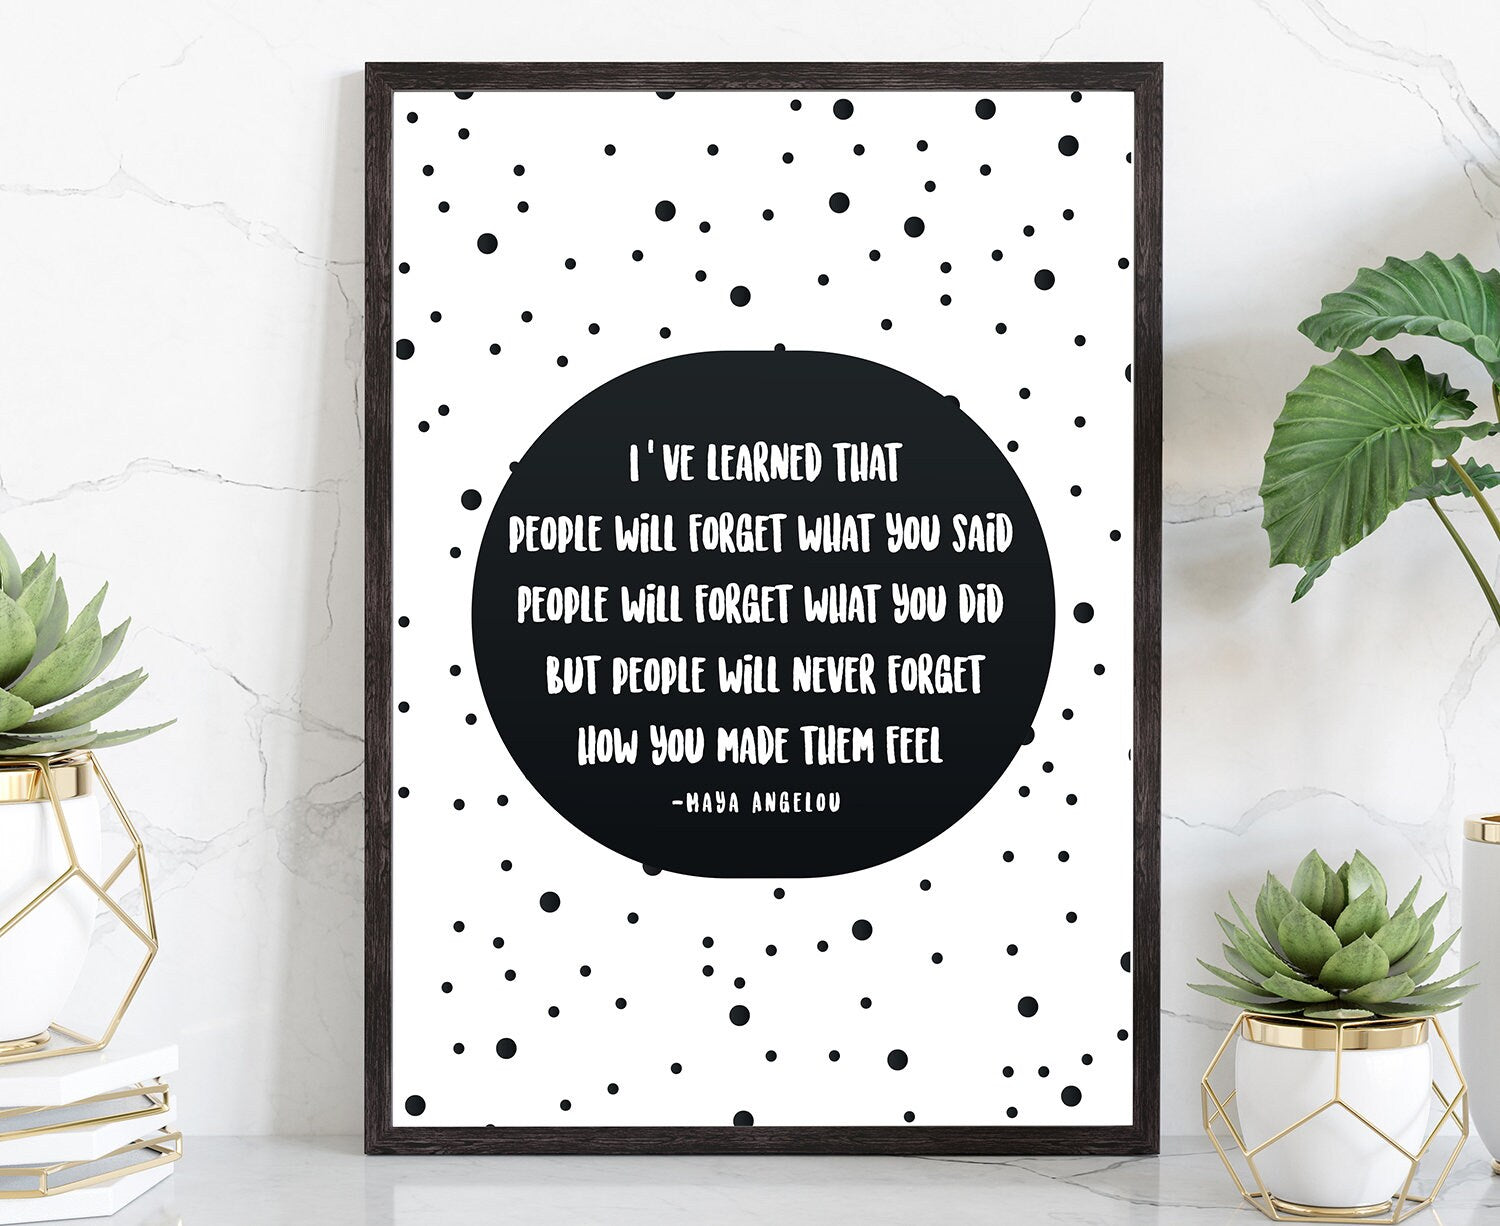 Maya Angelou quotes, Home wall decoration, Office wall decoration, Meaningful quotes poster print, Inspirational Quotes About Life, Posters